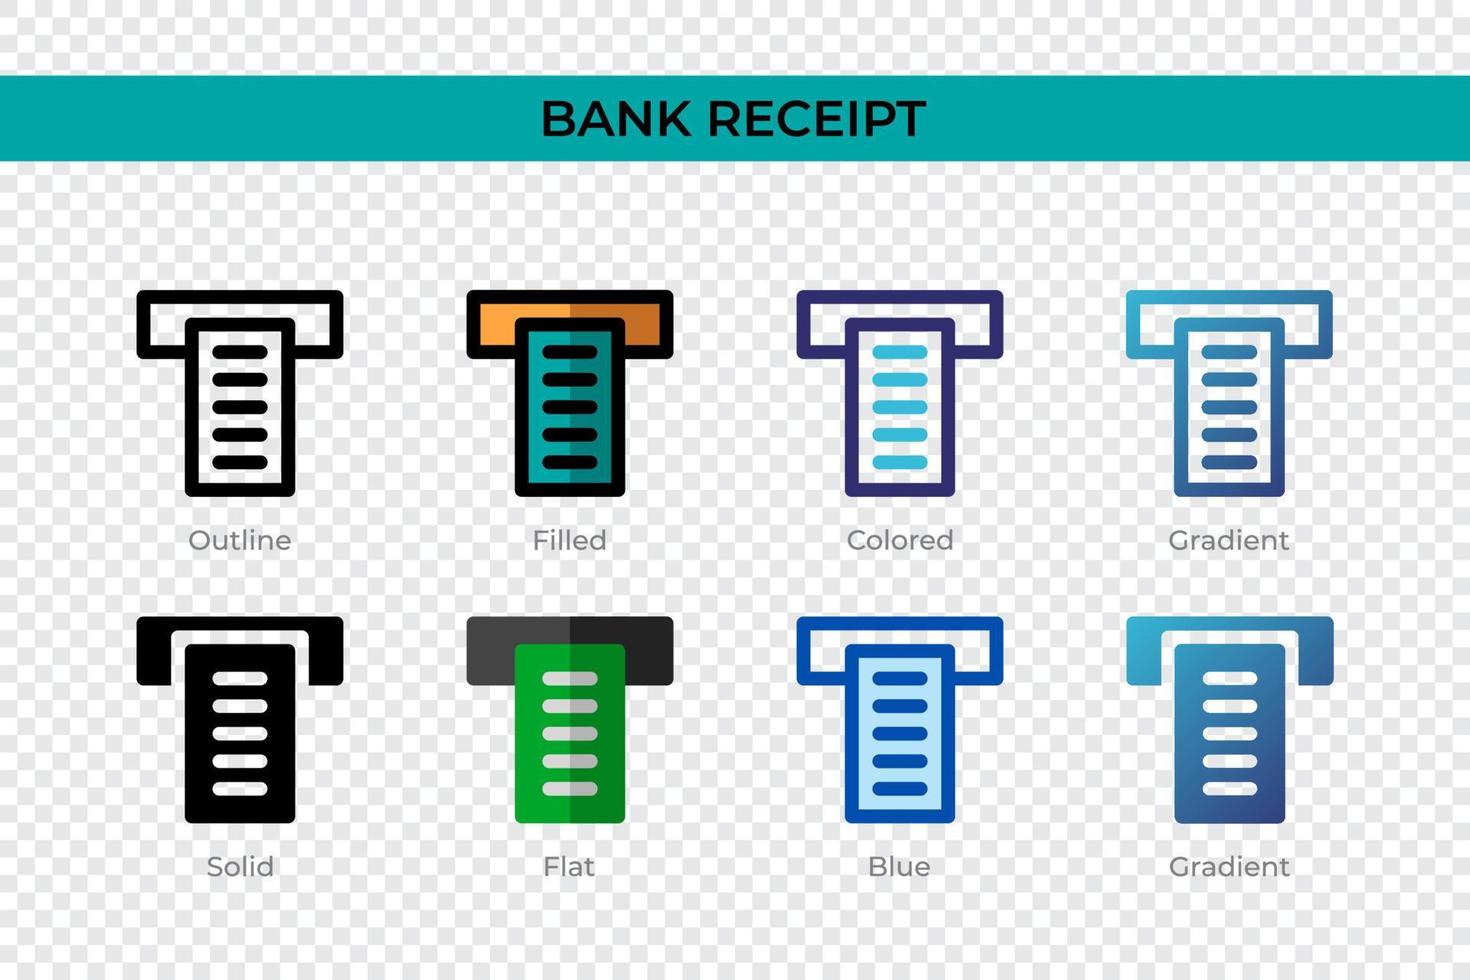 Bank Receipt icon in different style. Bank Receipt vector icons designed in outline, solid, colored, filled, gradient, and flat style. Symbol, logo illustration. Vector illustration